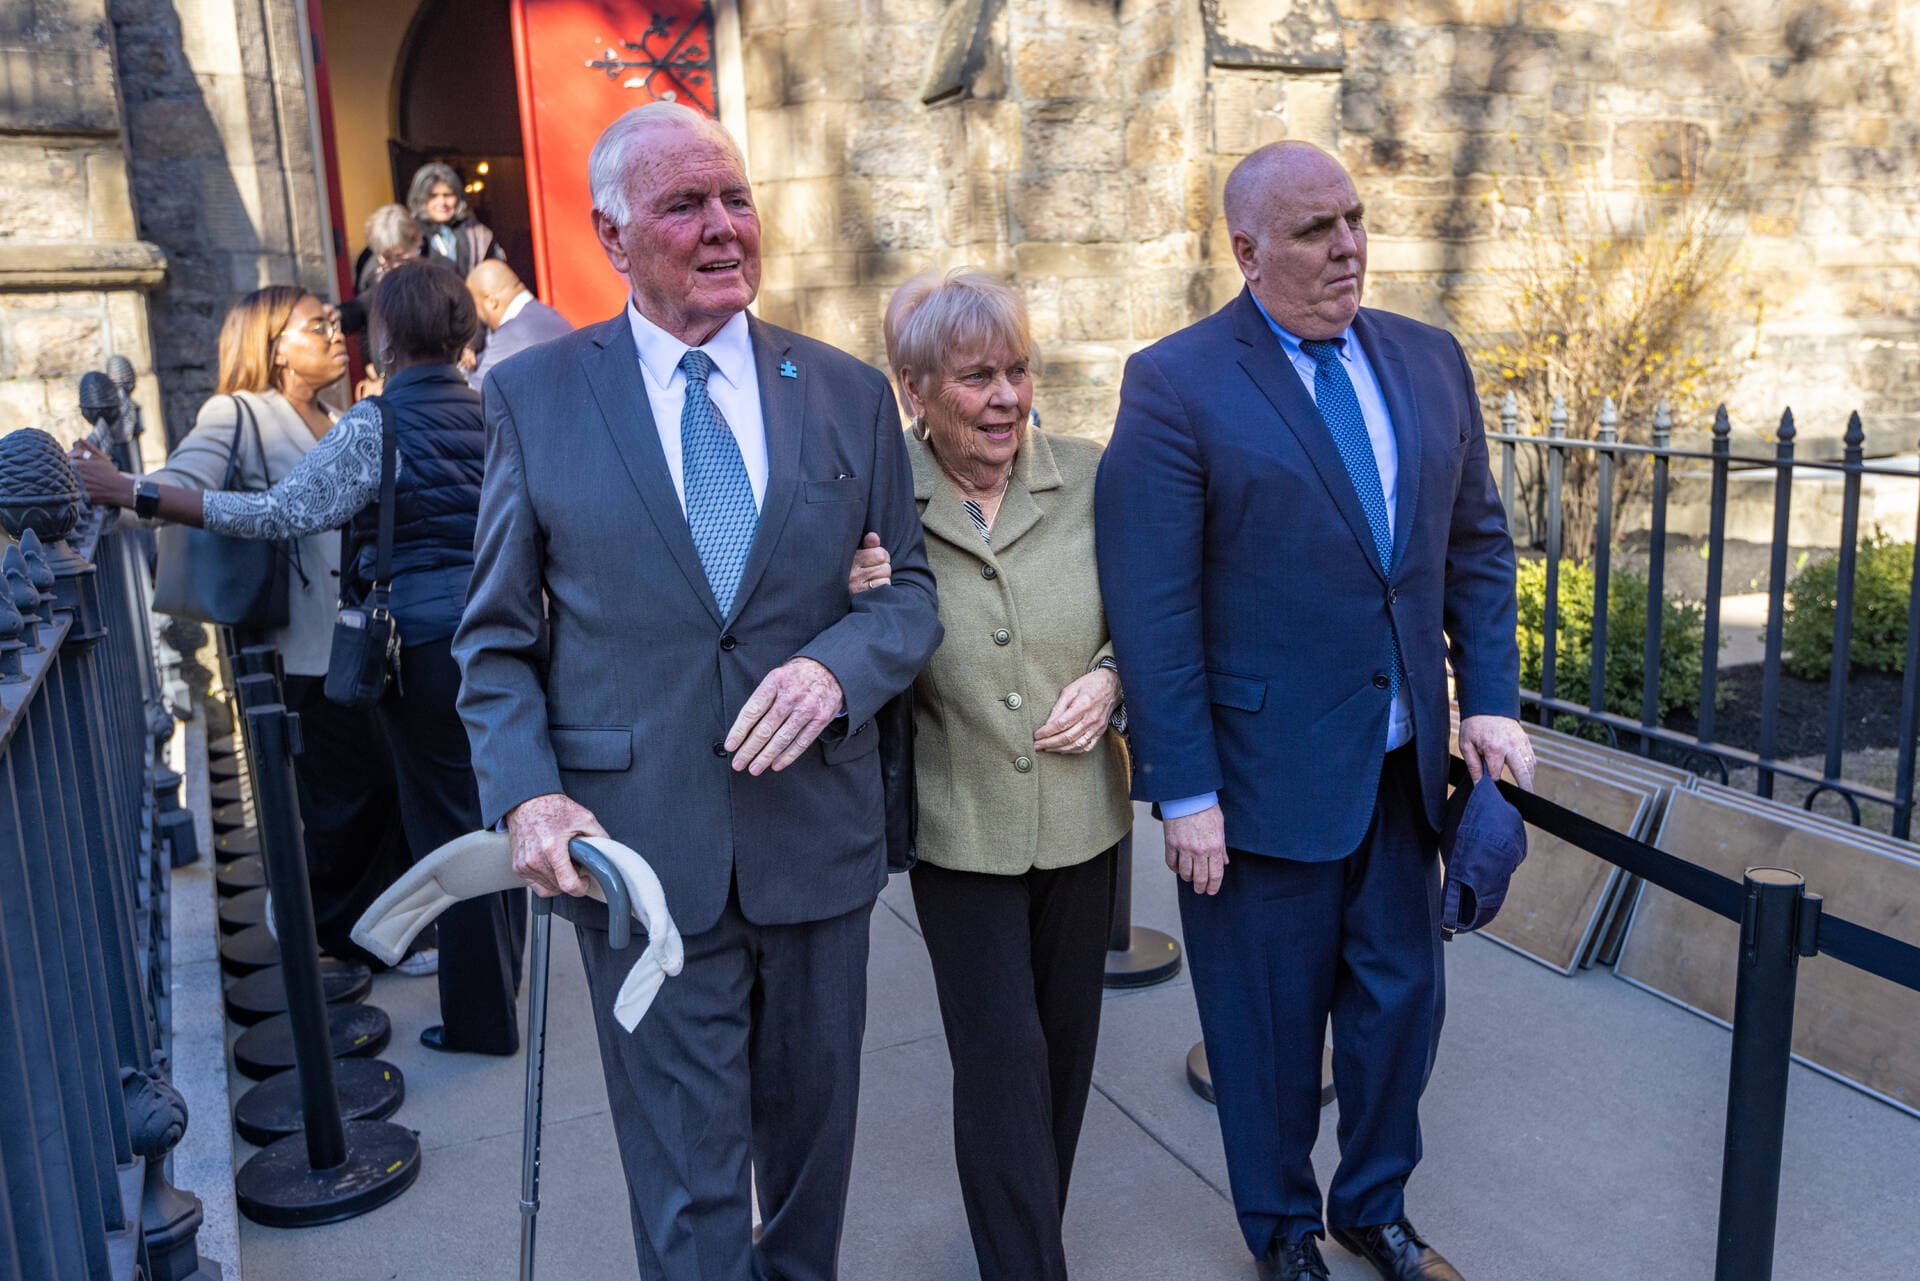 Former Mayor of Boston Ray Flynn, his wife Kathy and his son City Councilor Ed Flynn emerge from the Union United Methodist Church after visiting the body of the late Mel King. (Jesse Costa/WBUR)